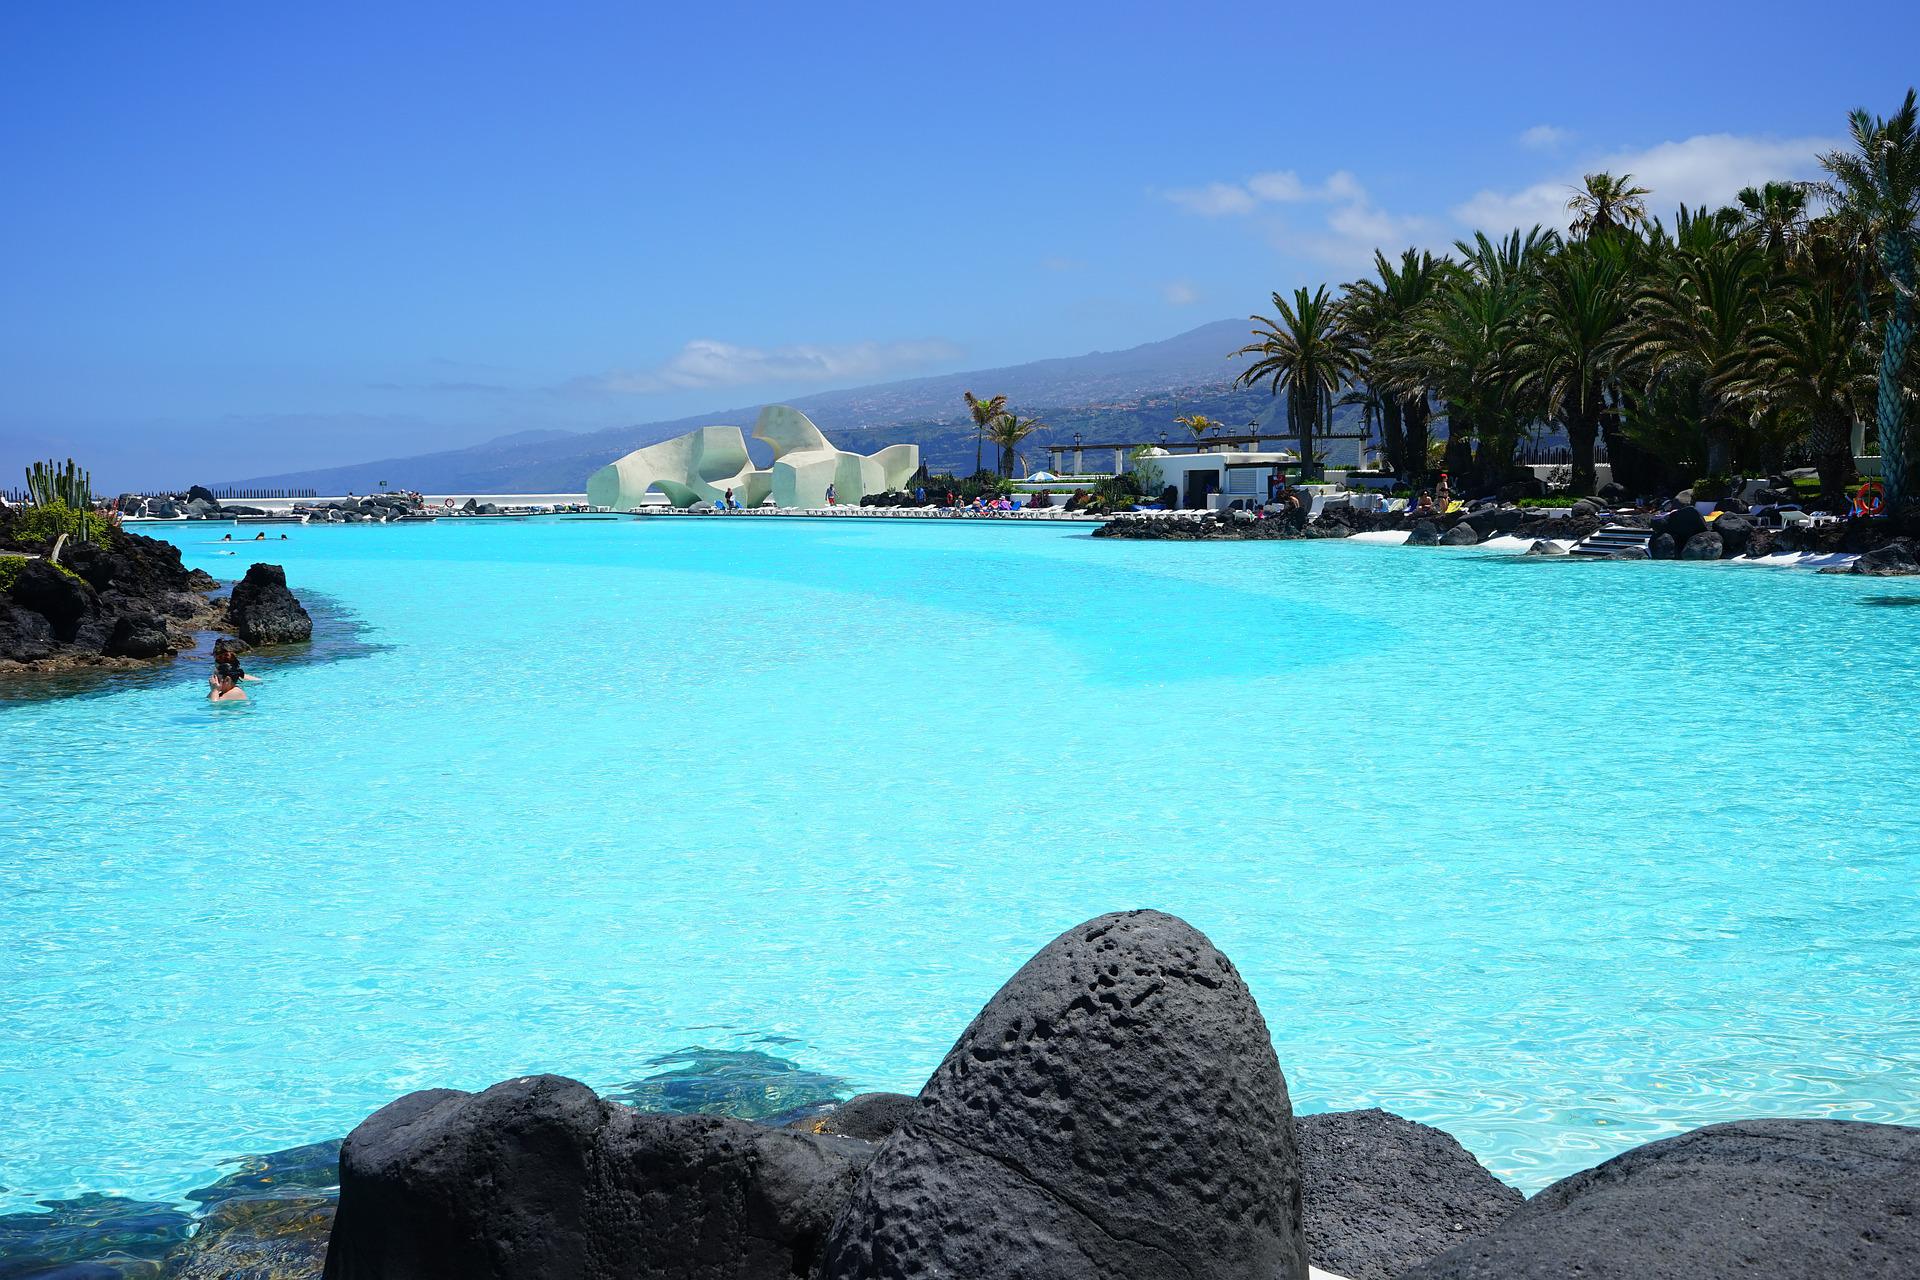 Moving to the Canary Islands: Some reasons to move to the Canary Islands